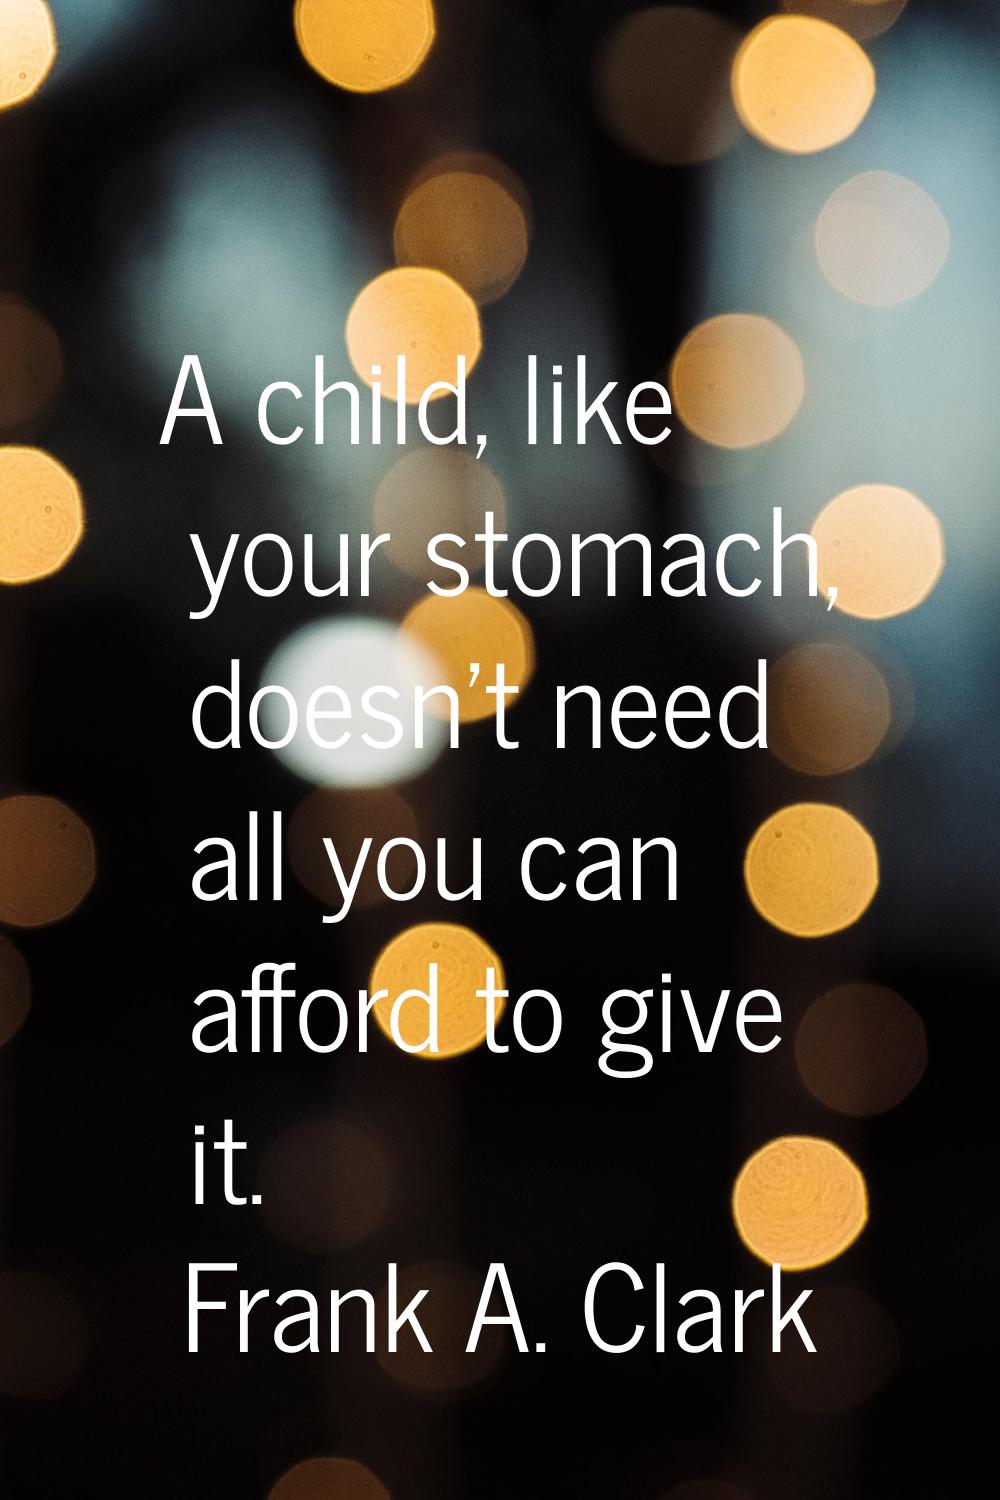 A child, like your stomach, doesn't need all you can afford to give it.